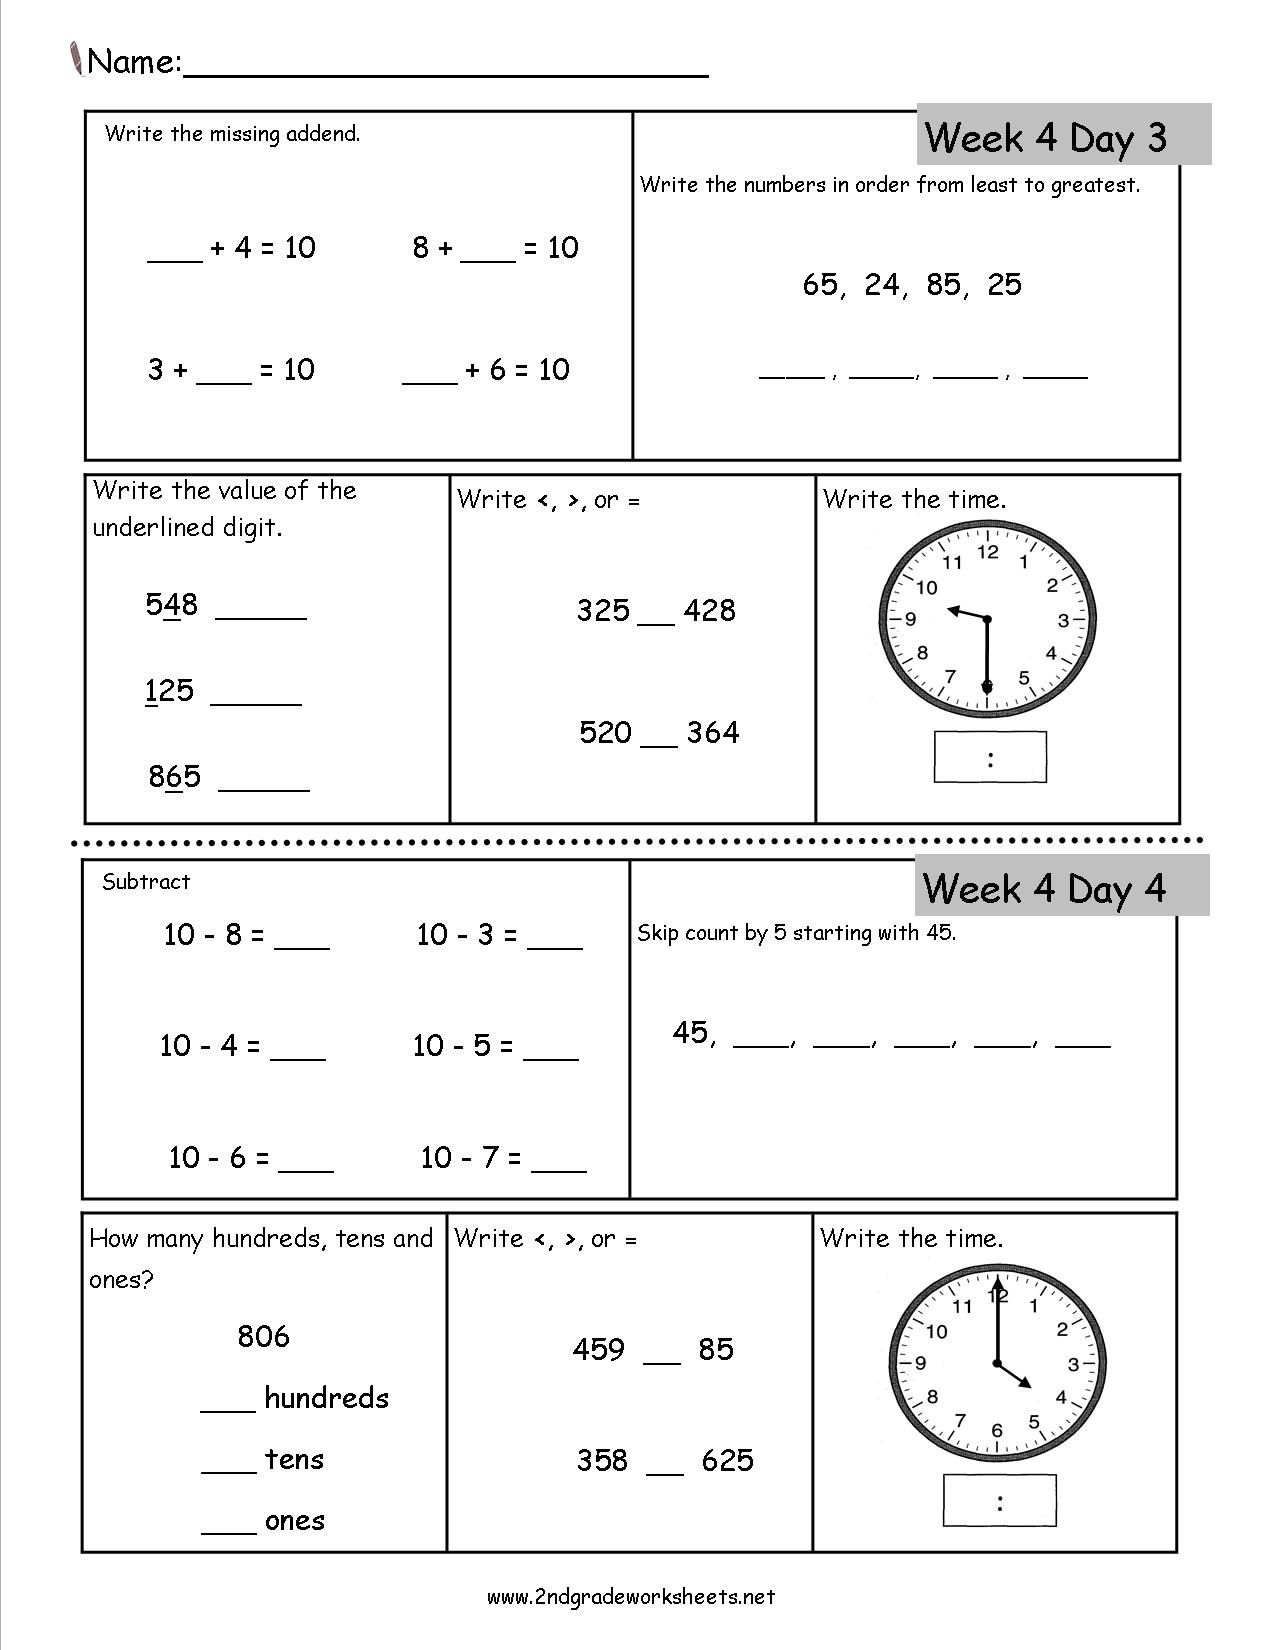 2nd-grade-daily-math-worksheets-fun-halloween-math-worksheets-for-2nd